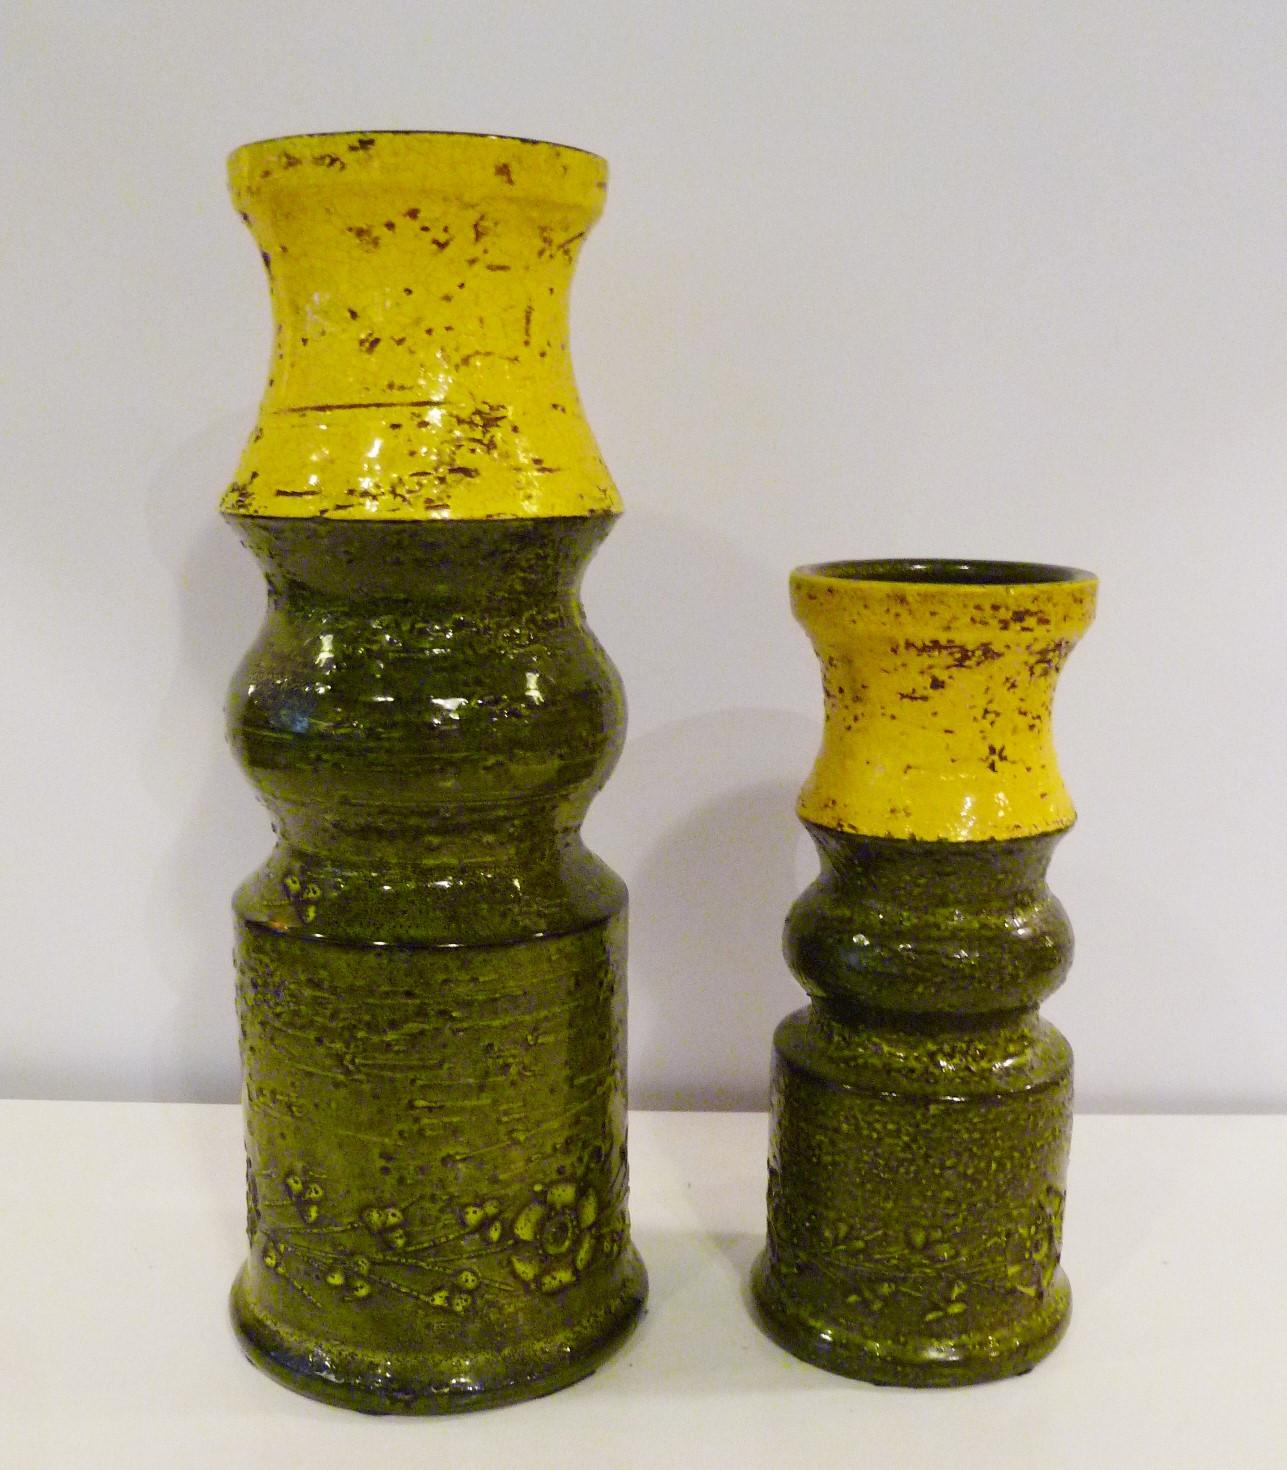 A pair of midcentury Italian Modern Bitossi textured pottery vases made for Rosenthal Netter and created by Aldo Londi. In two different sizes make a very nice decoration statement if used together. Impressed modern floral design around the bottom